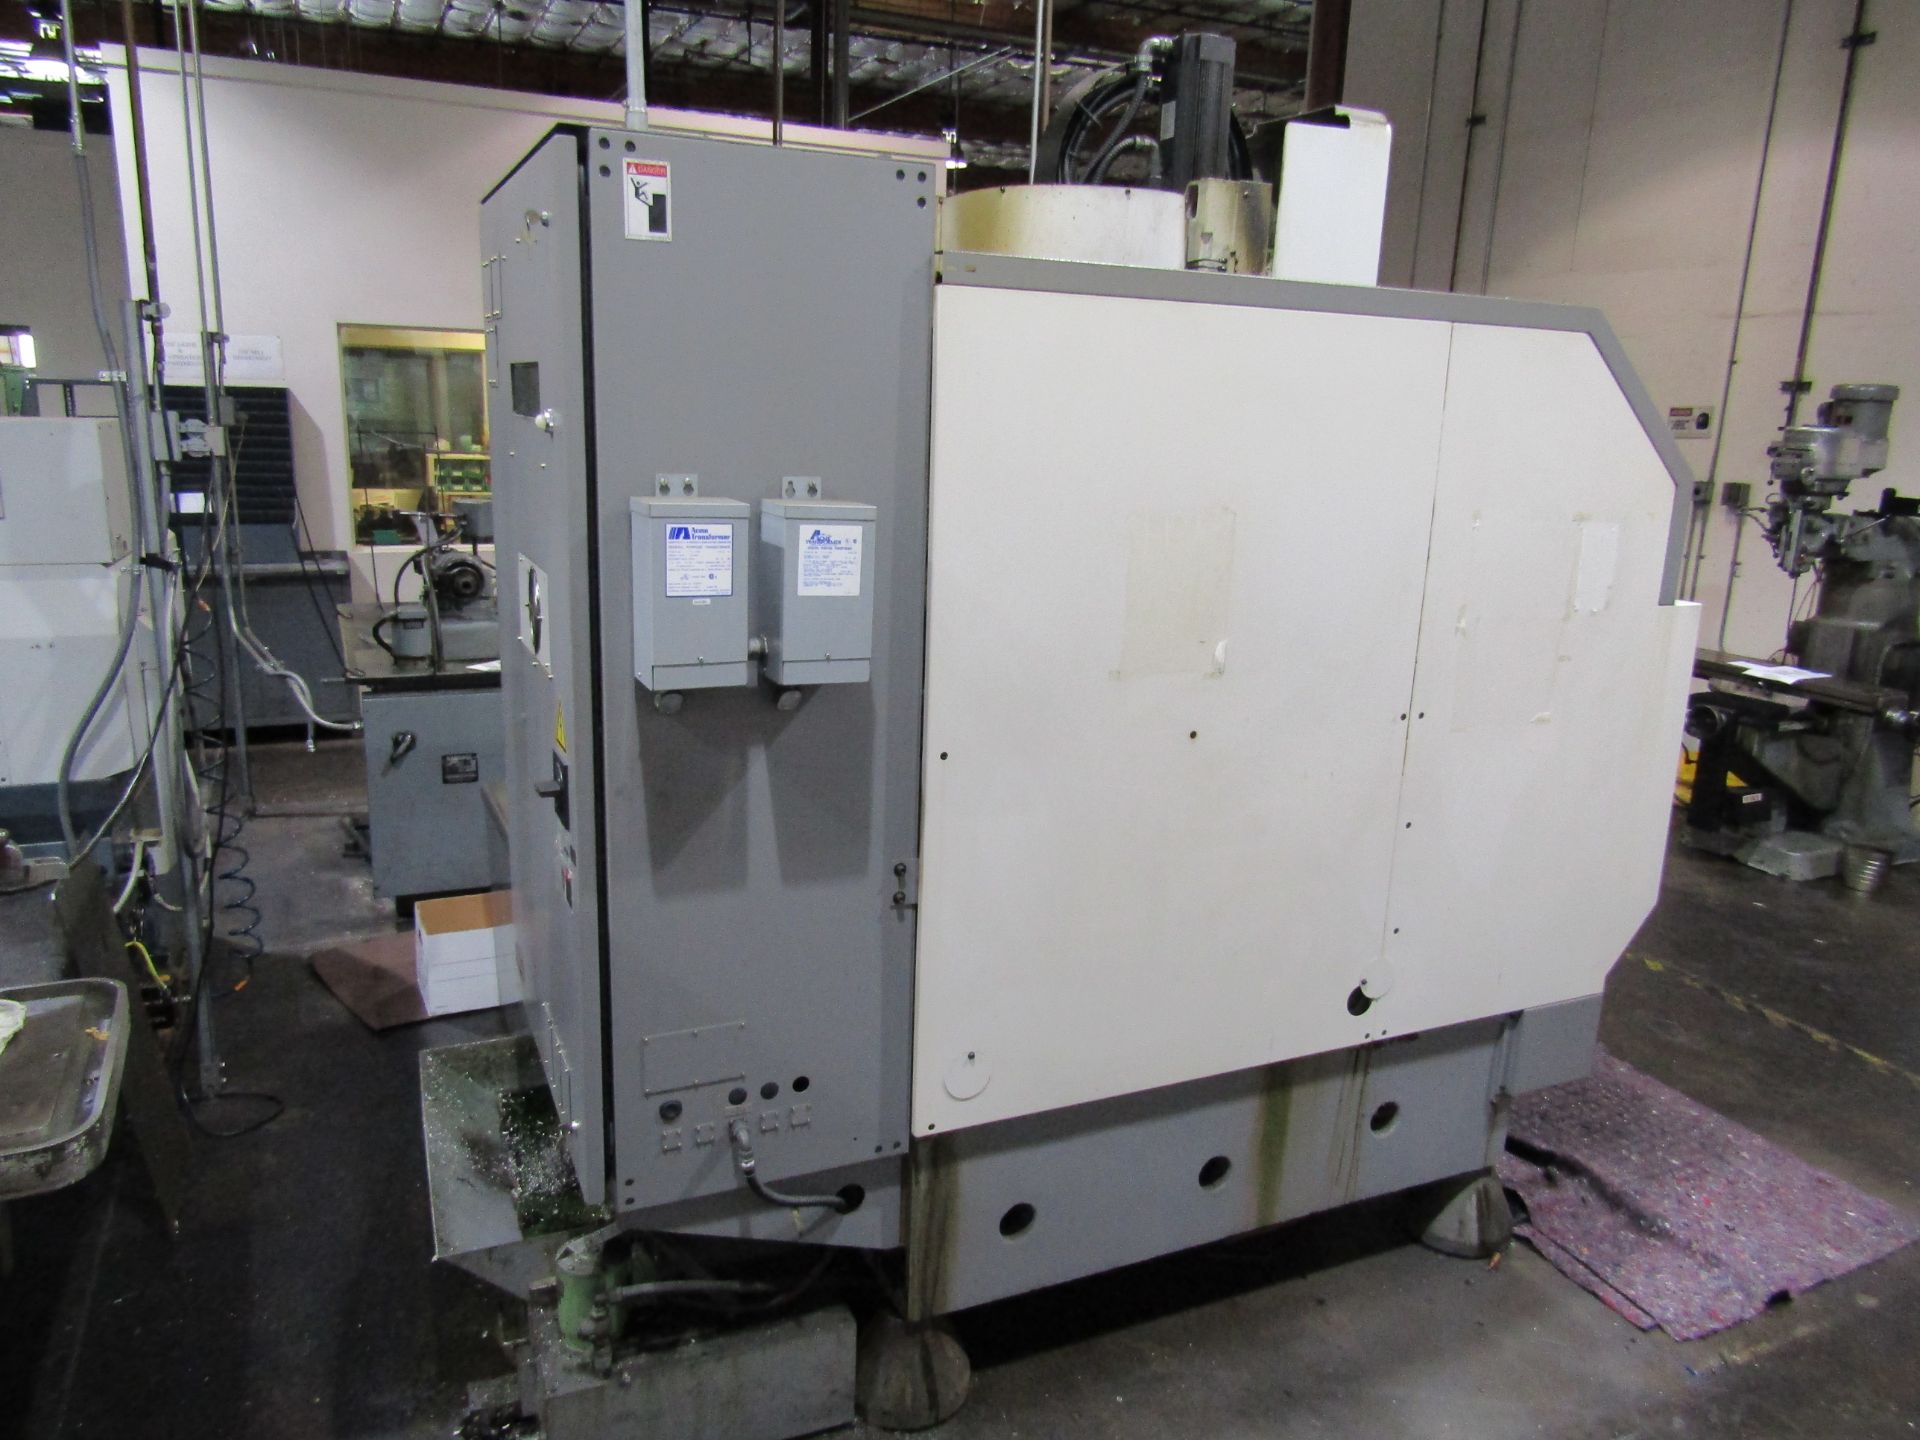 ENSHU CNC MILL VERTICAL MACHINING CENTER, MODEL S300, SERIAL 1041, MANUFACTURED 1996, ENAC SYSTEM - Image 6 of 8